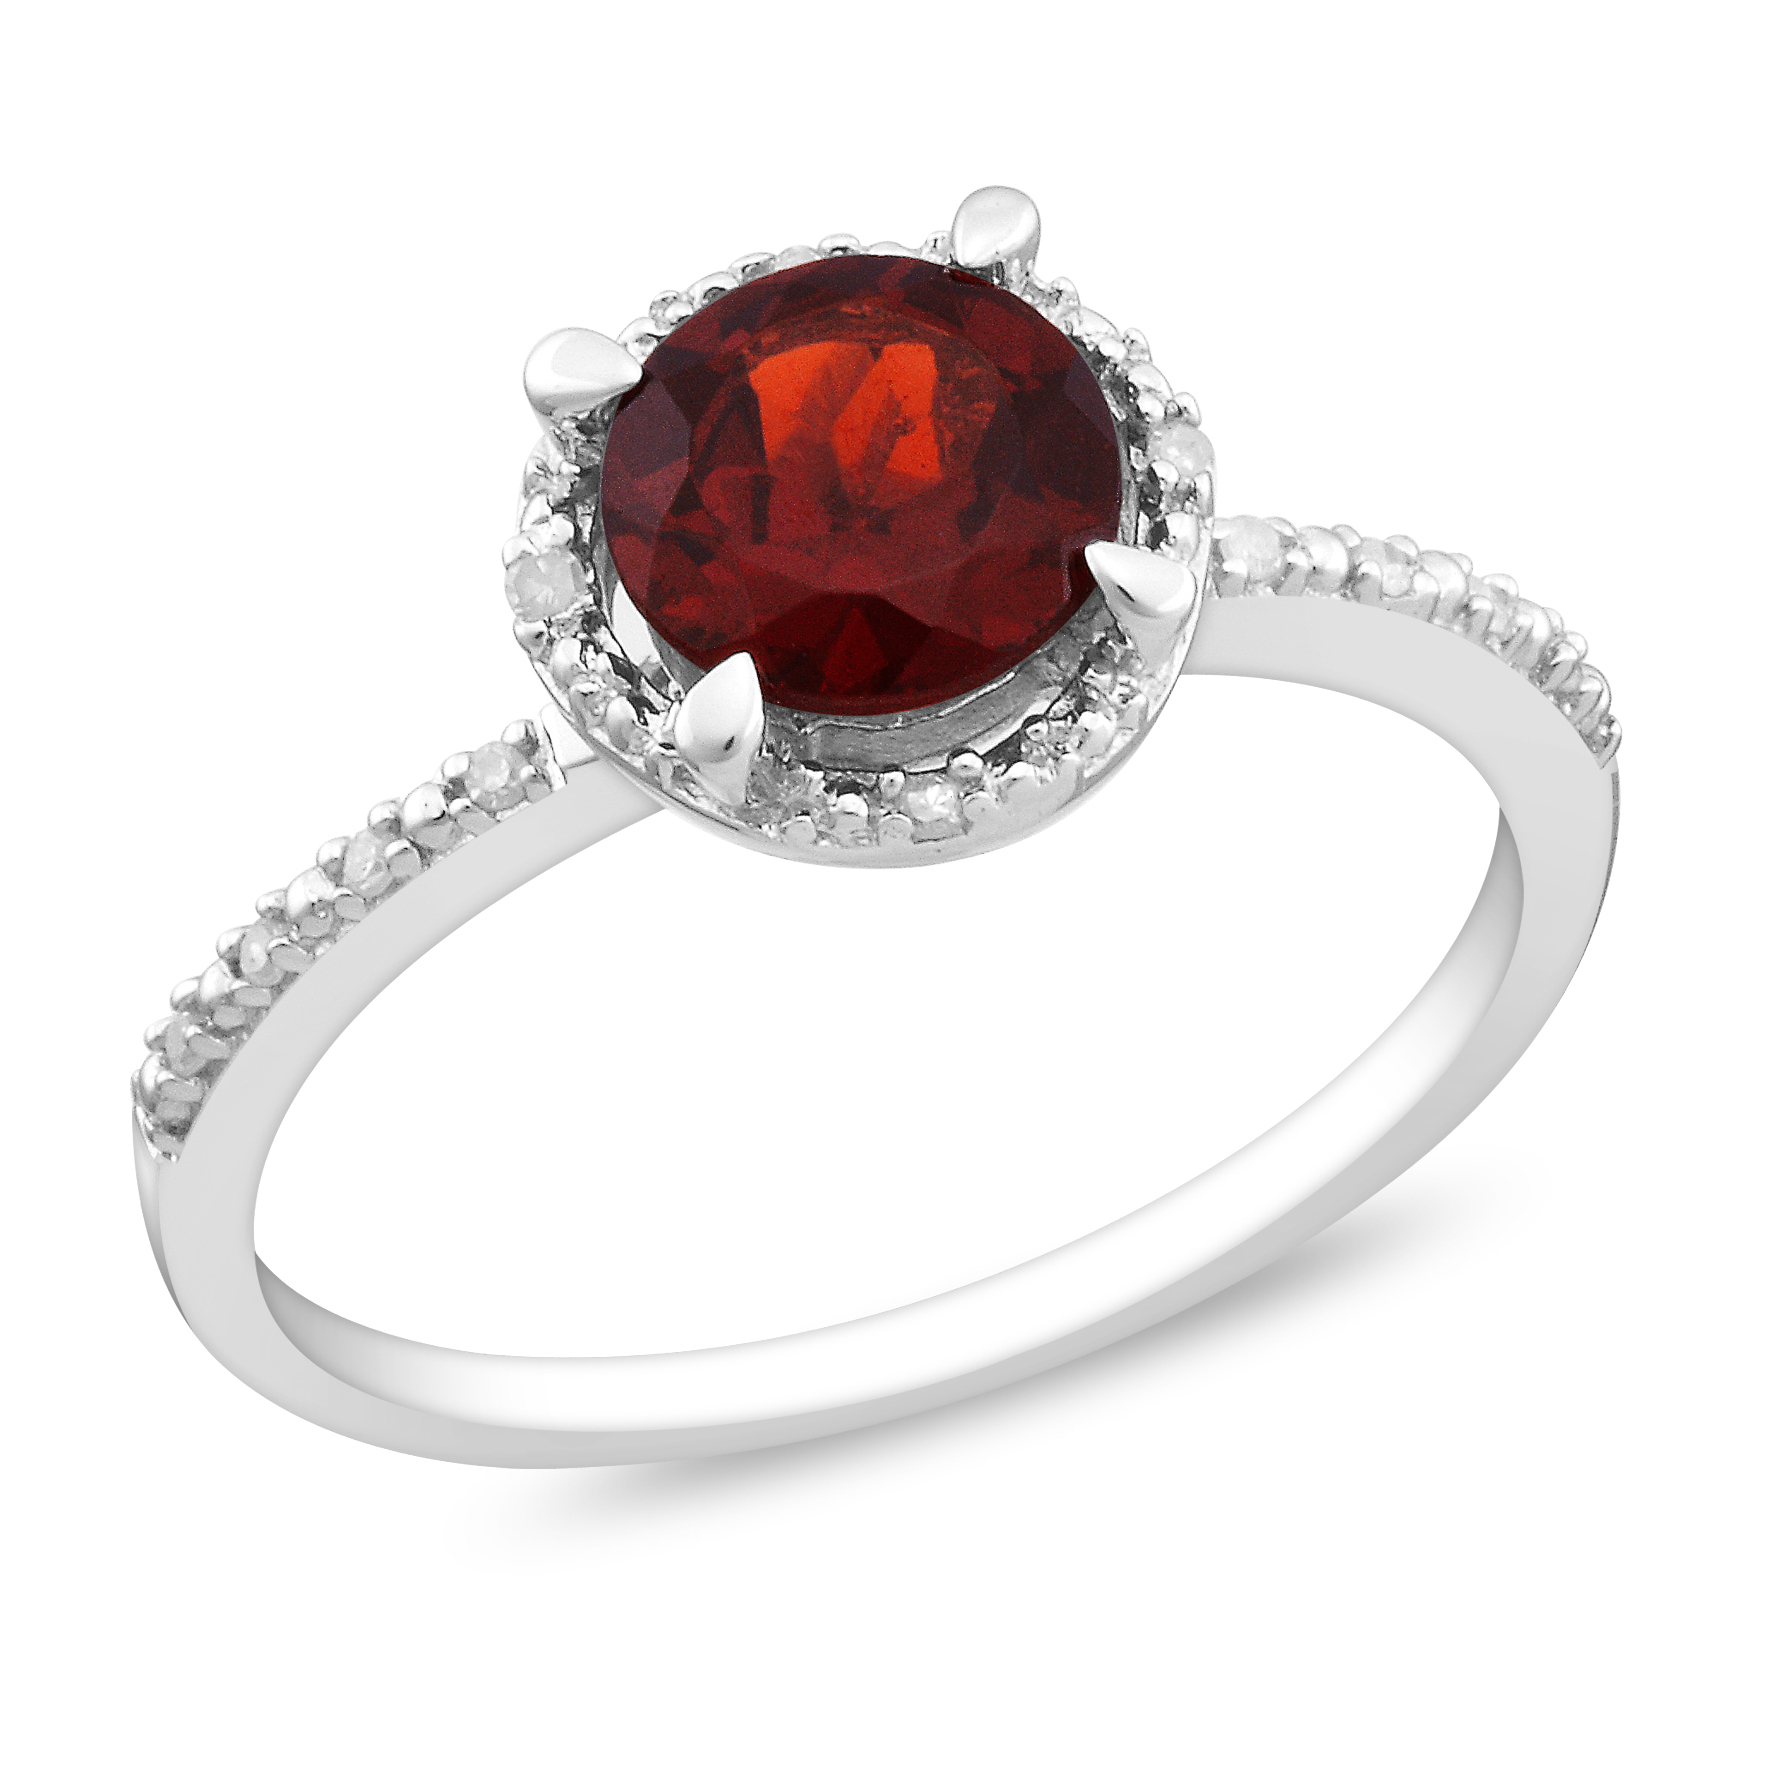 Amour 0.05 Carat T.W. Diamond and 1 5/8 Carat T.G.W. Garnet Fashion Ring in Sterling Silver GH I3